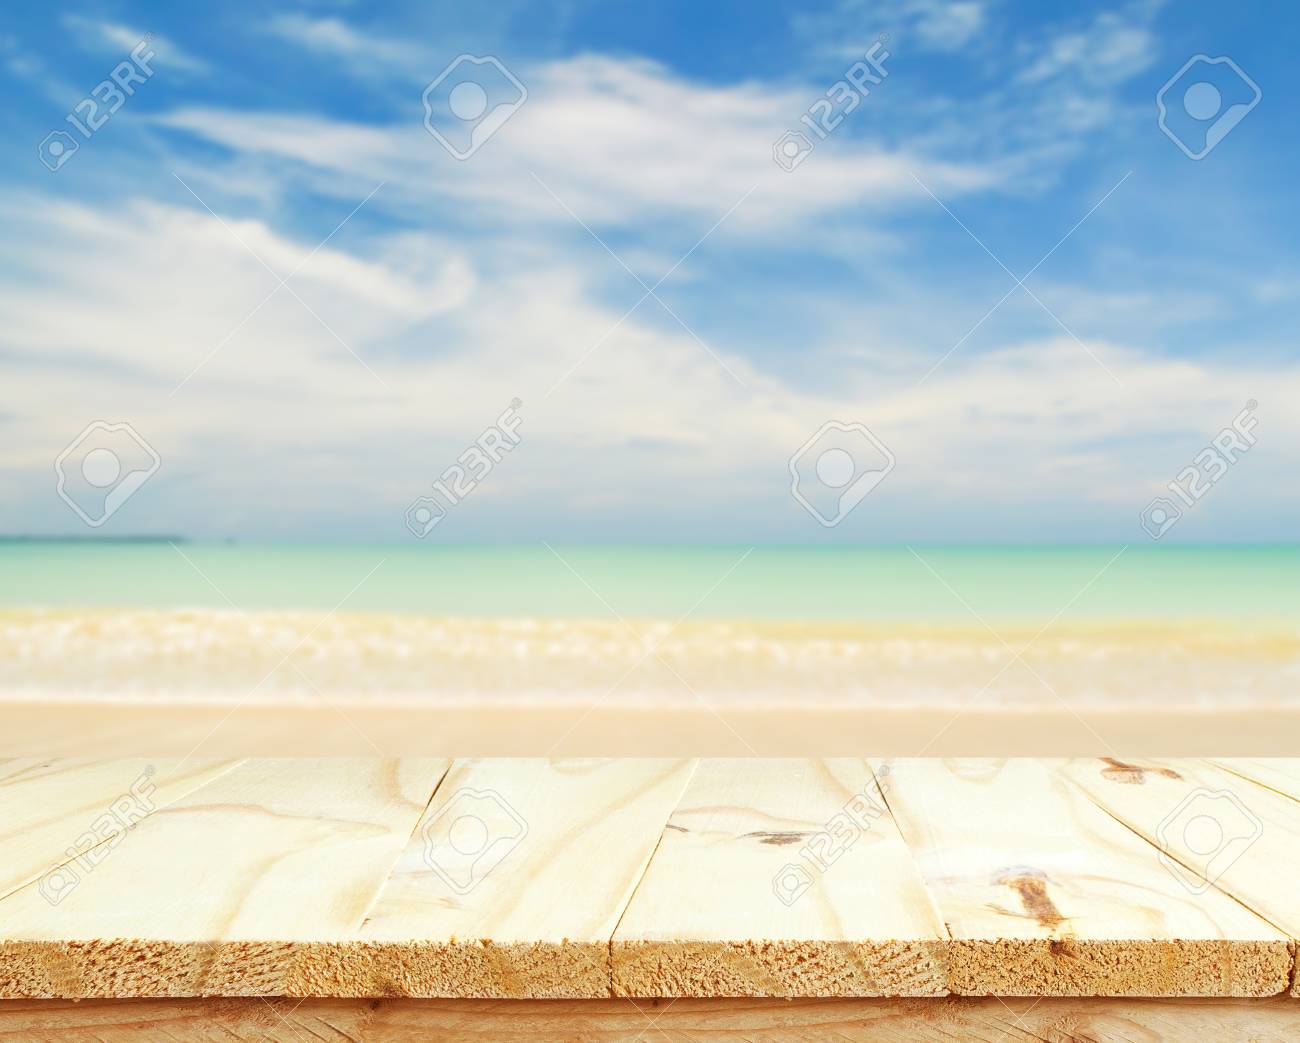 Wooden Floor And Sea Landscape Background Relaxation Or Vacation